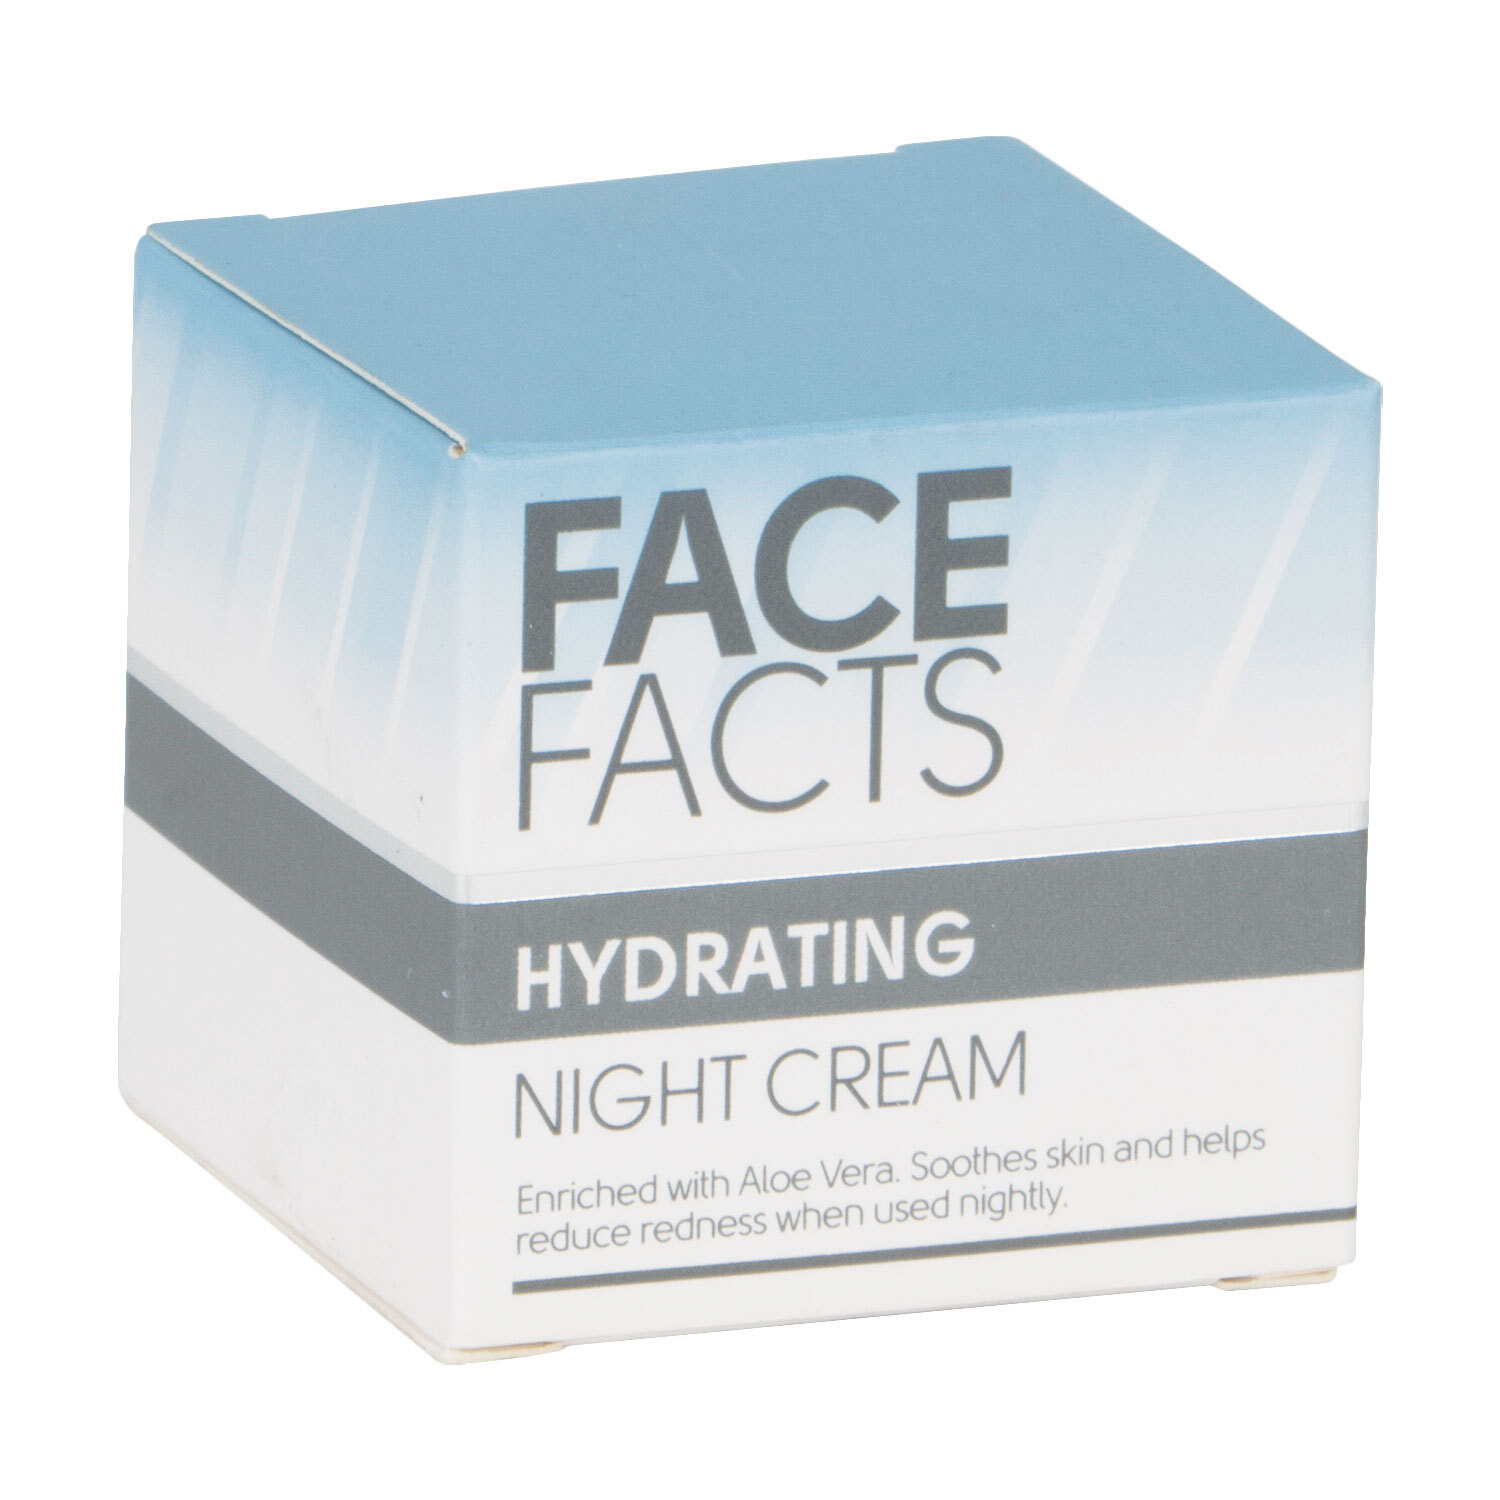 Face Facts Hydrating Night Cream Image